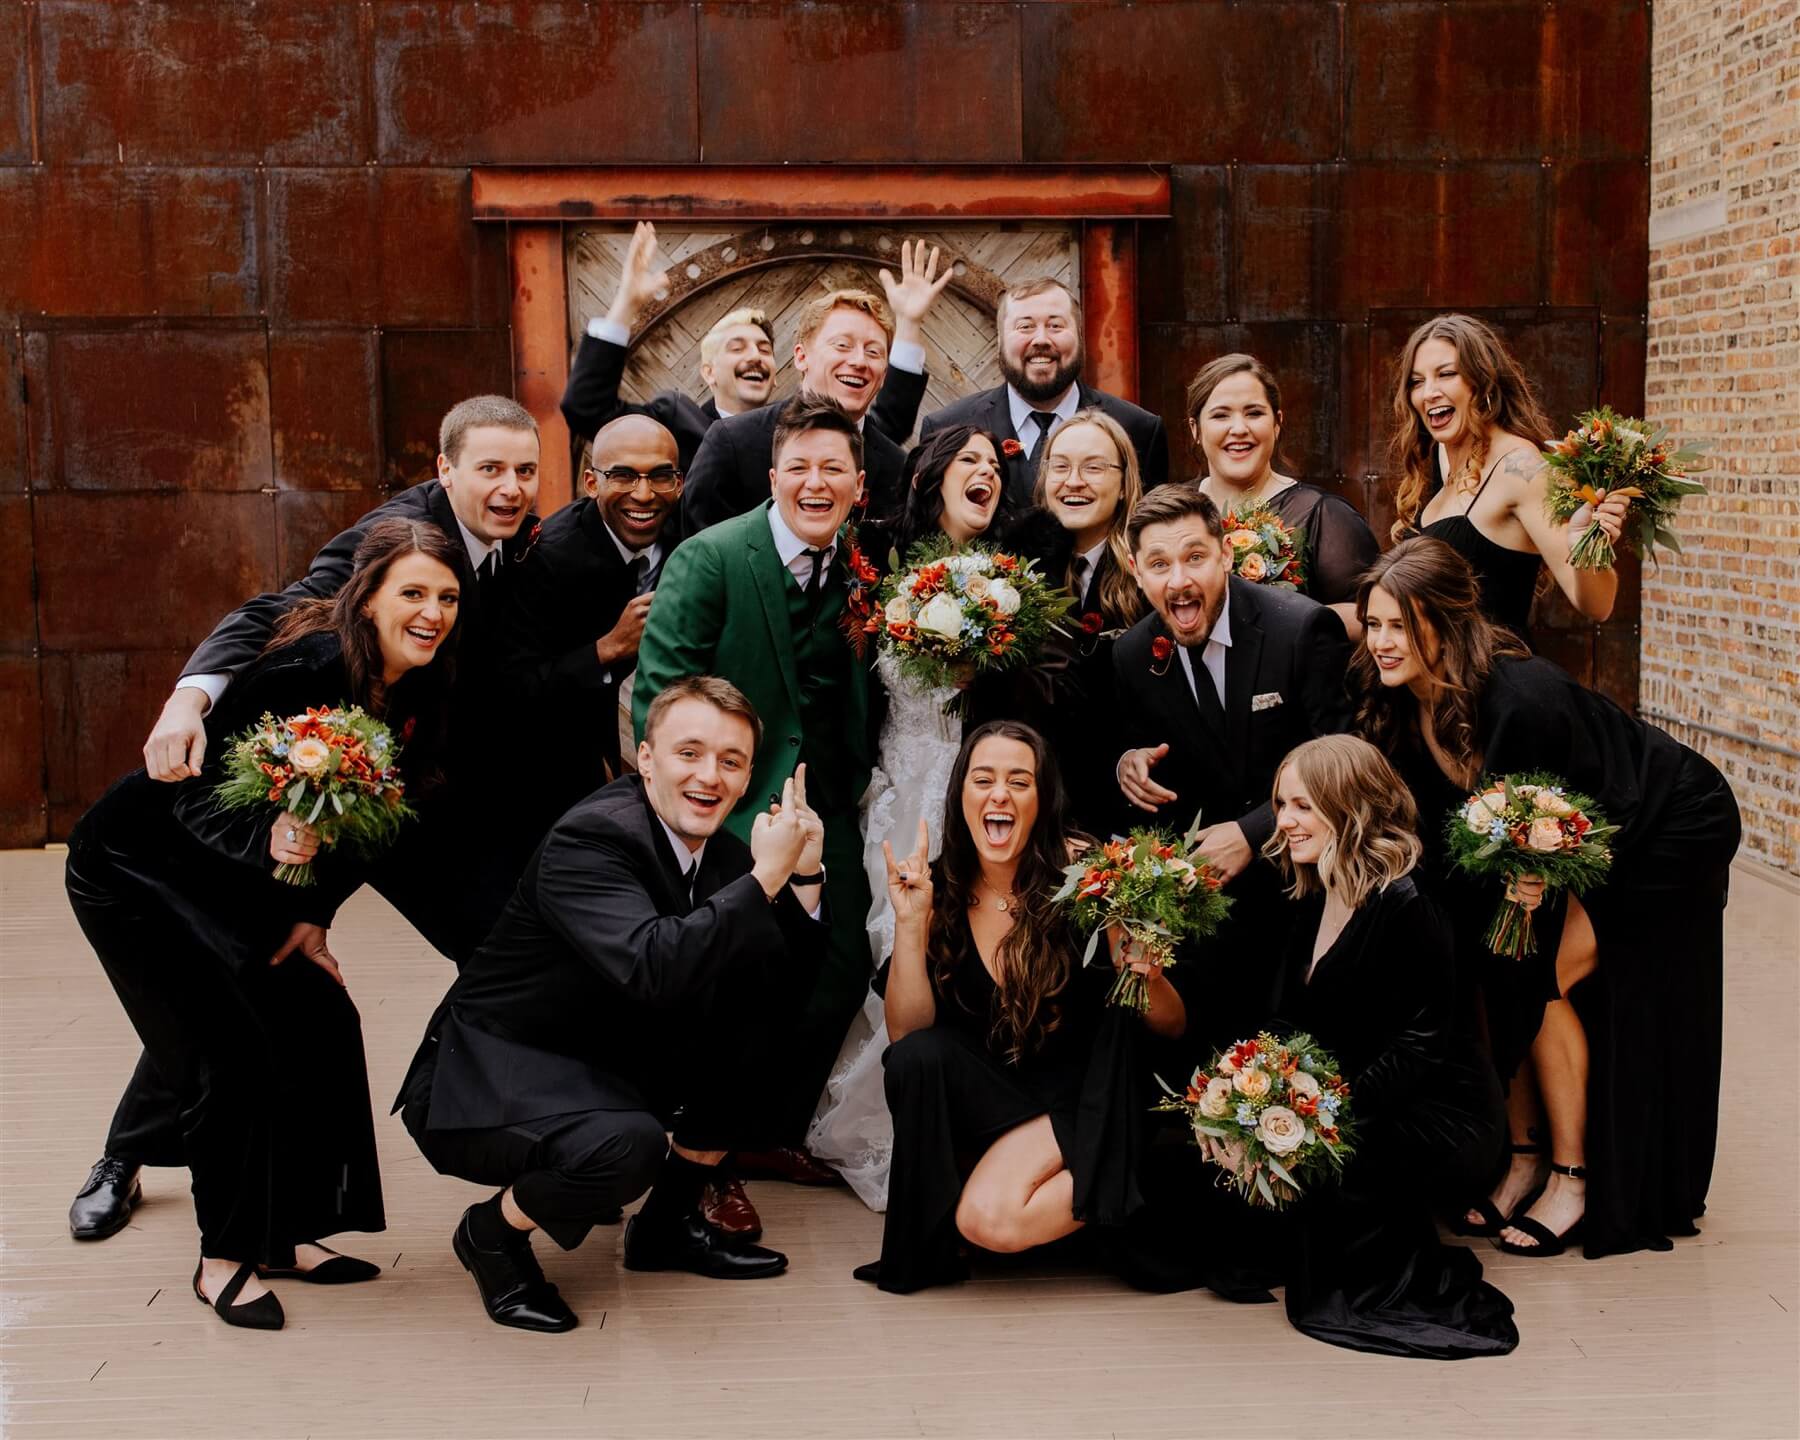 Couple in candid photo with wedding party